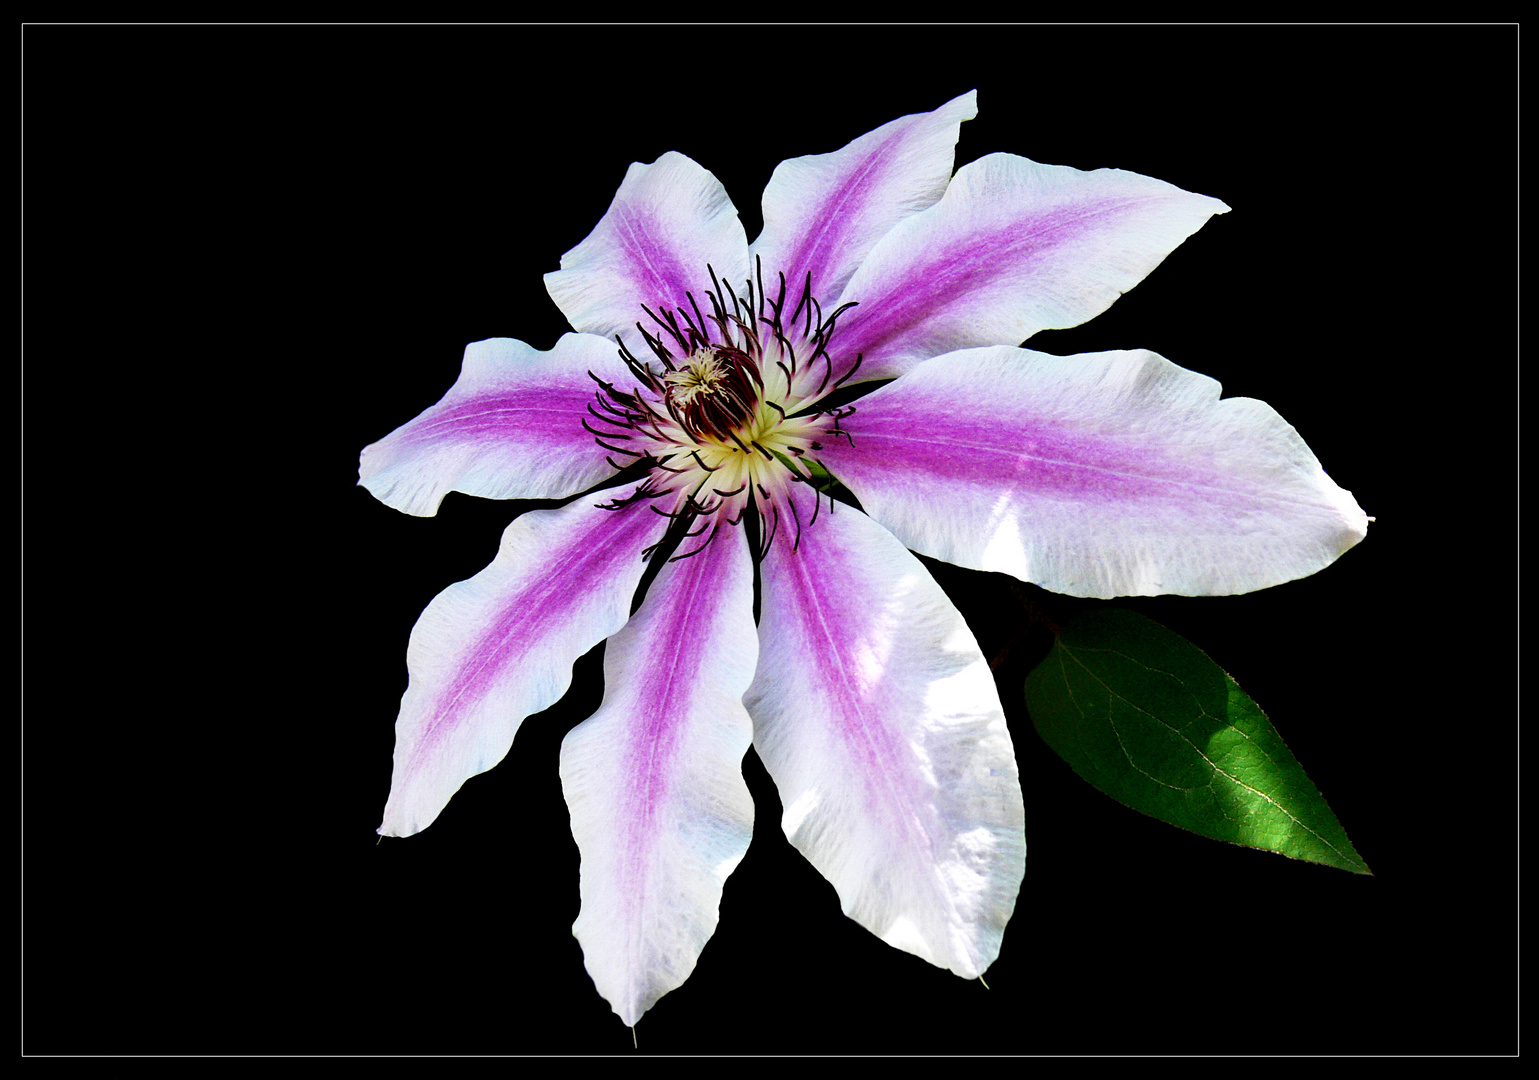 Clematis-Sorte „Nelly Moser“ 